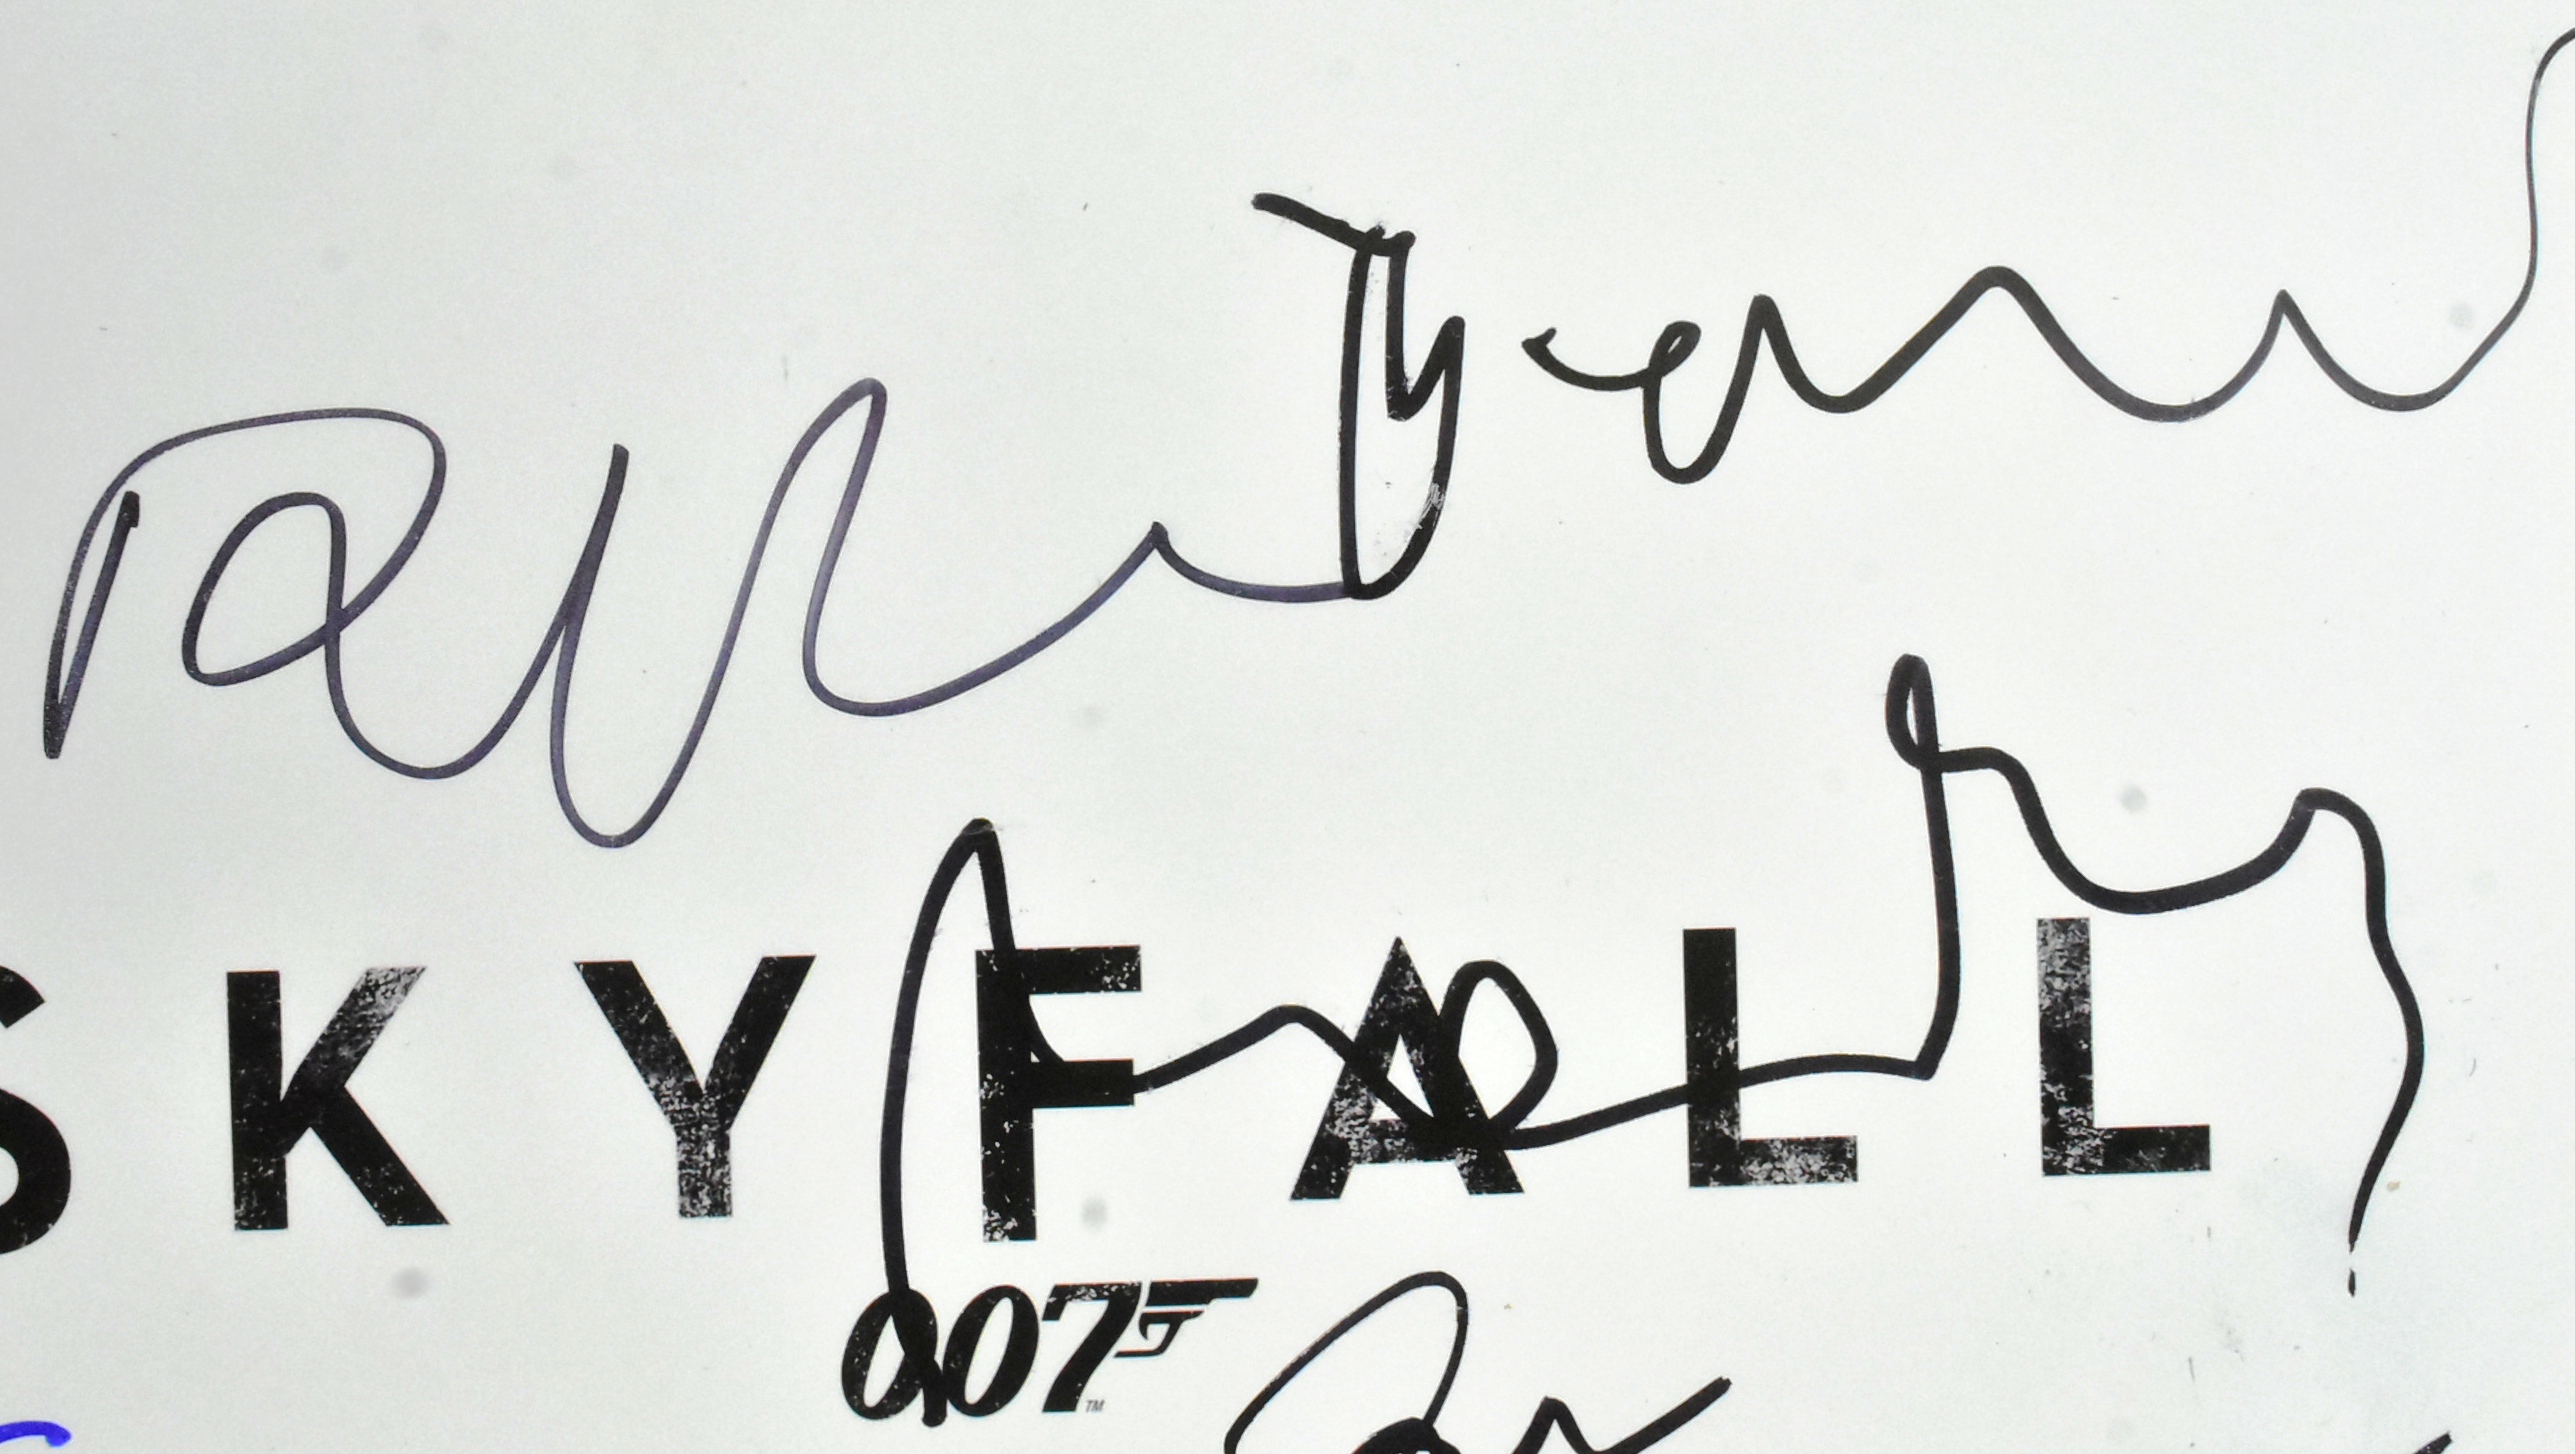 SKYFALL (2012) - JAMES BOND 007 - CAST SIGNED 8X10" FROM PREMIERE - Image 4 of 4